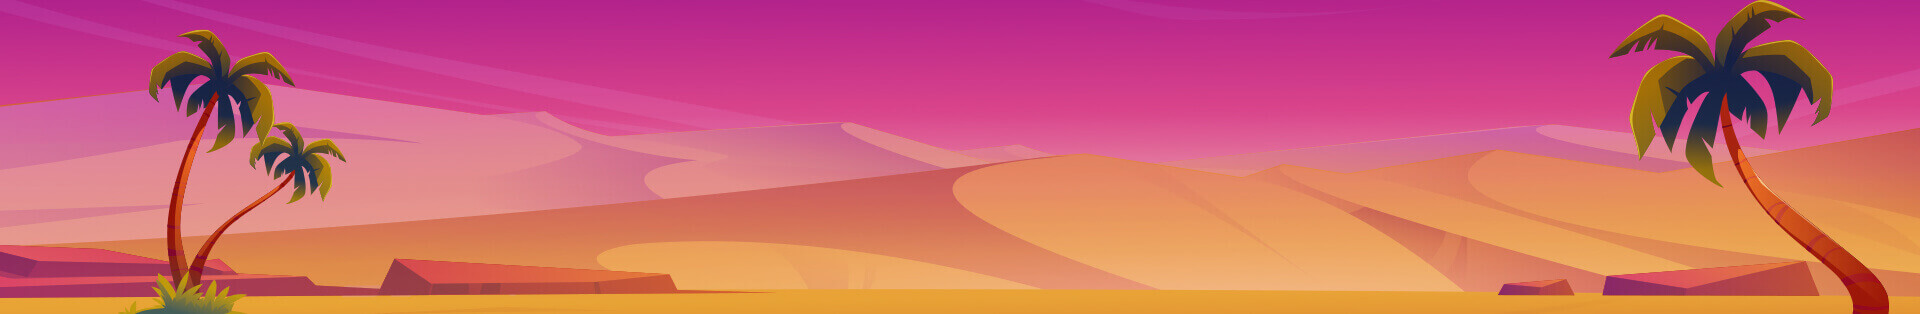  An oasis of palm trees stands amid golden dunes under a gradient pink sky.